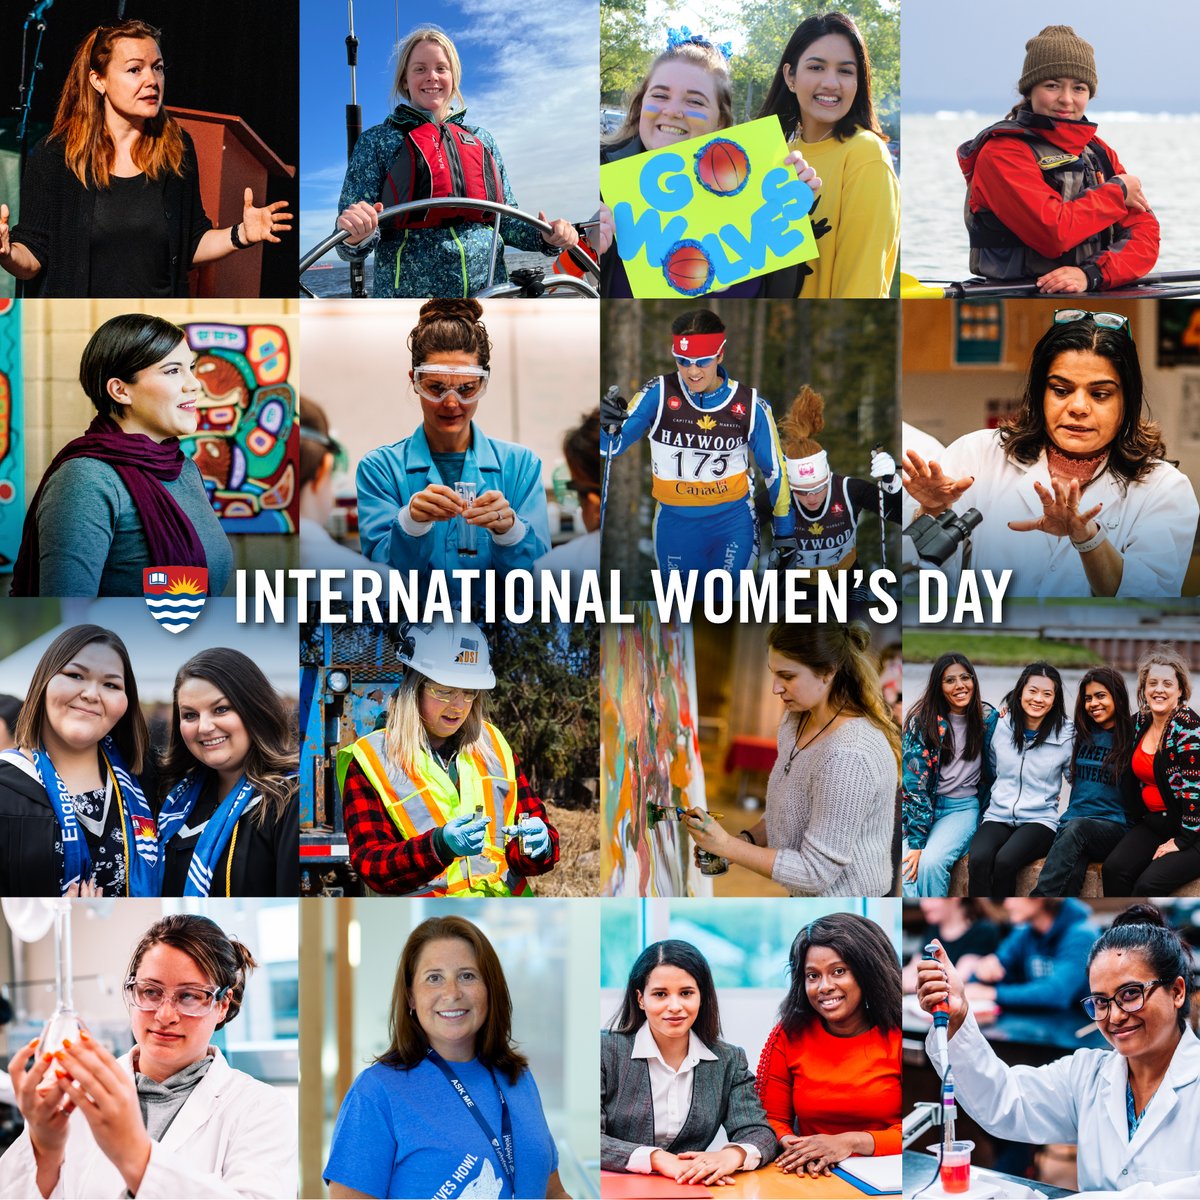 To all the strong, talented and inspirational women that make #LakeheadU an exceptional place to learn, grow, work and play, we recognize and appreciate you, today and everyday 💙💛 #internationalwomensday